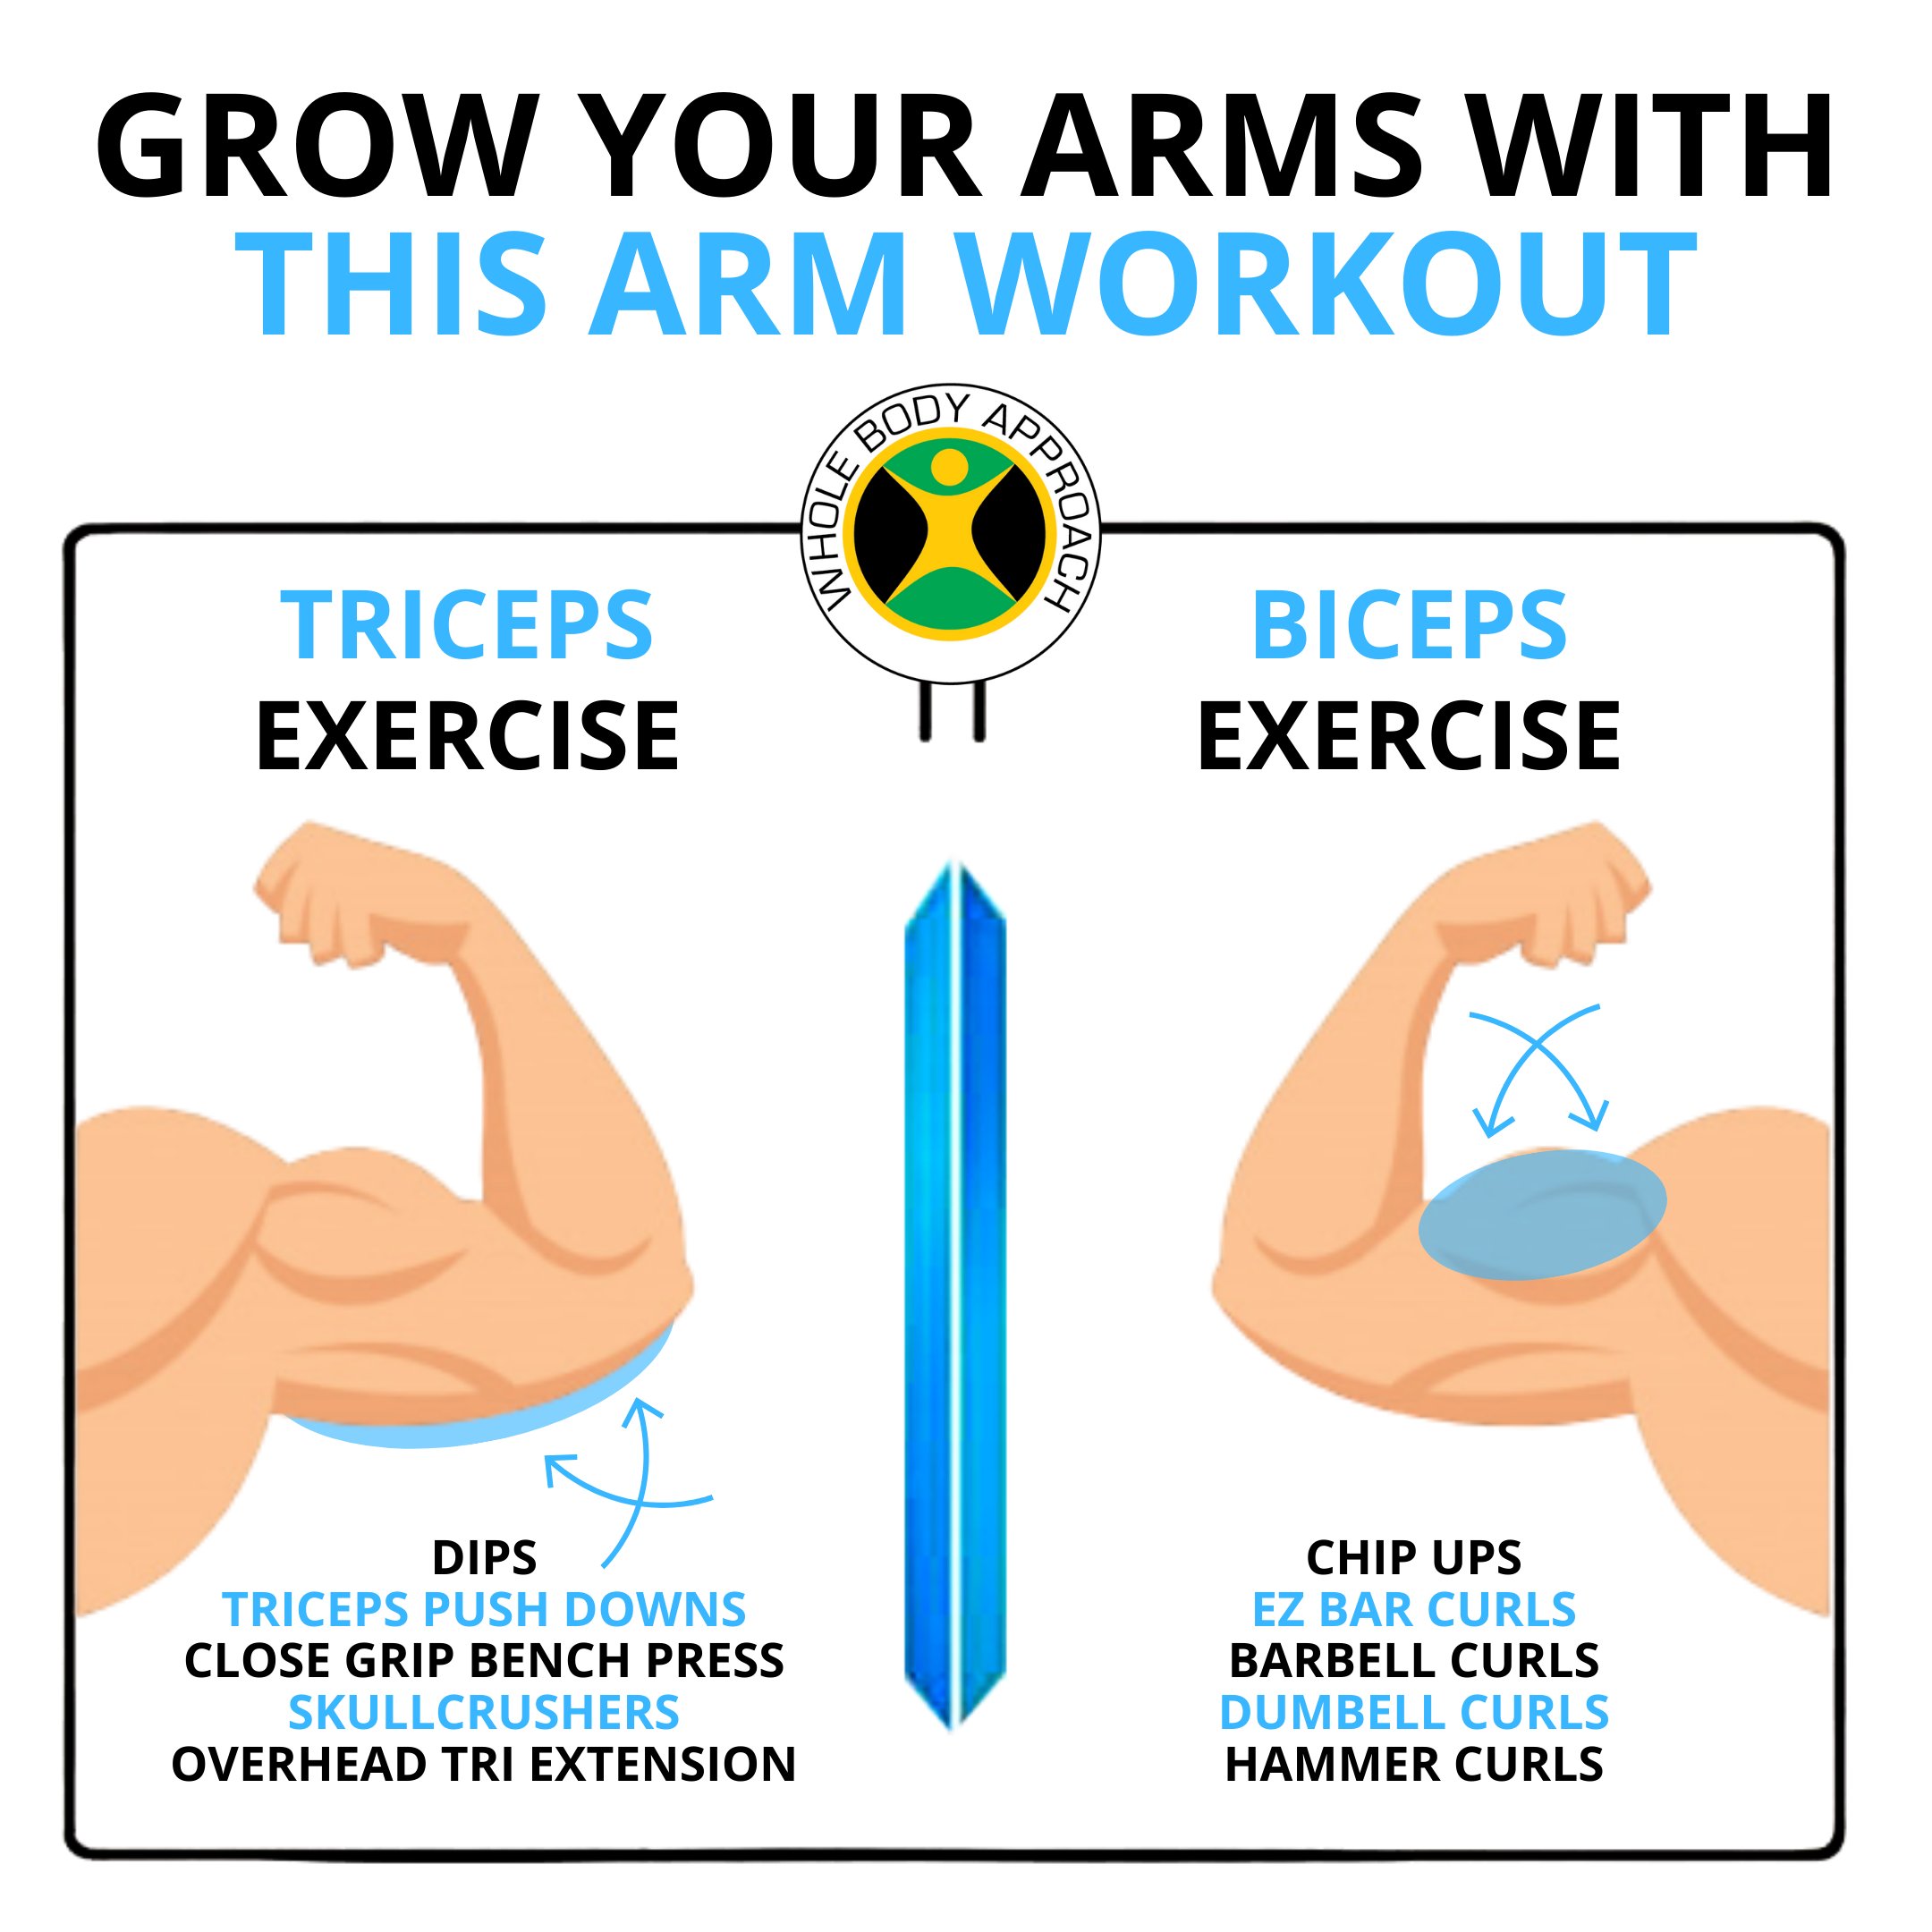 Whole Body Approach on X: Grow Your Arms With This Arm Workout #exercise # exercises #exercisedaily #exercisemotivation #exercisebenefits  #exerciseoftheday #exerciseismedicine #exerciseplan #exerciseroutine # exercisetips #exerciseguide #Exerciseathome